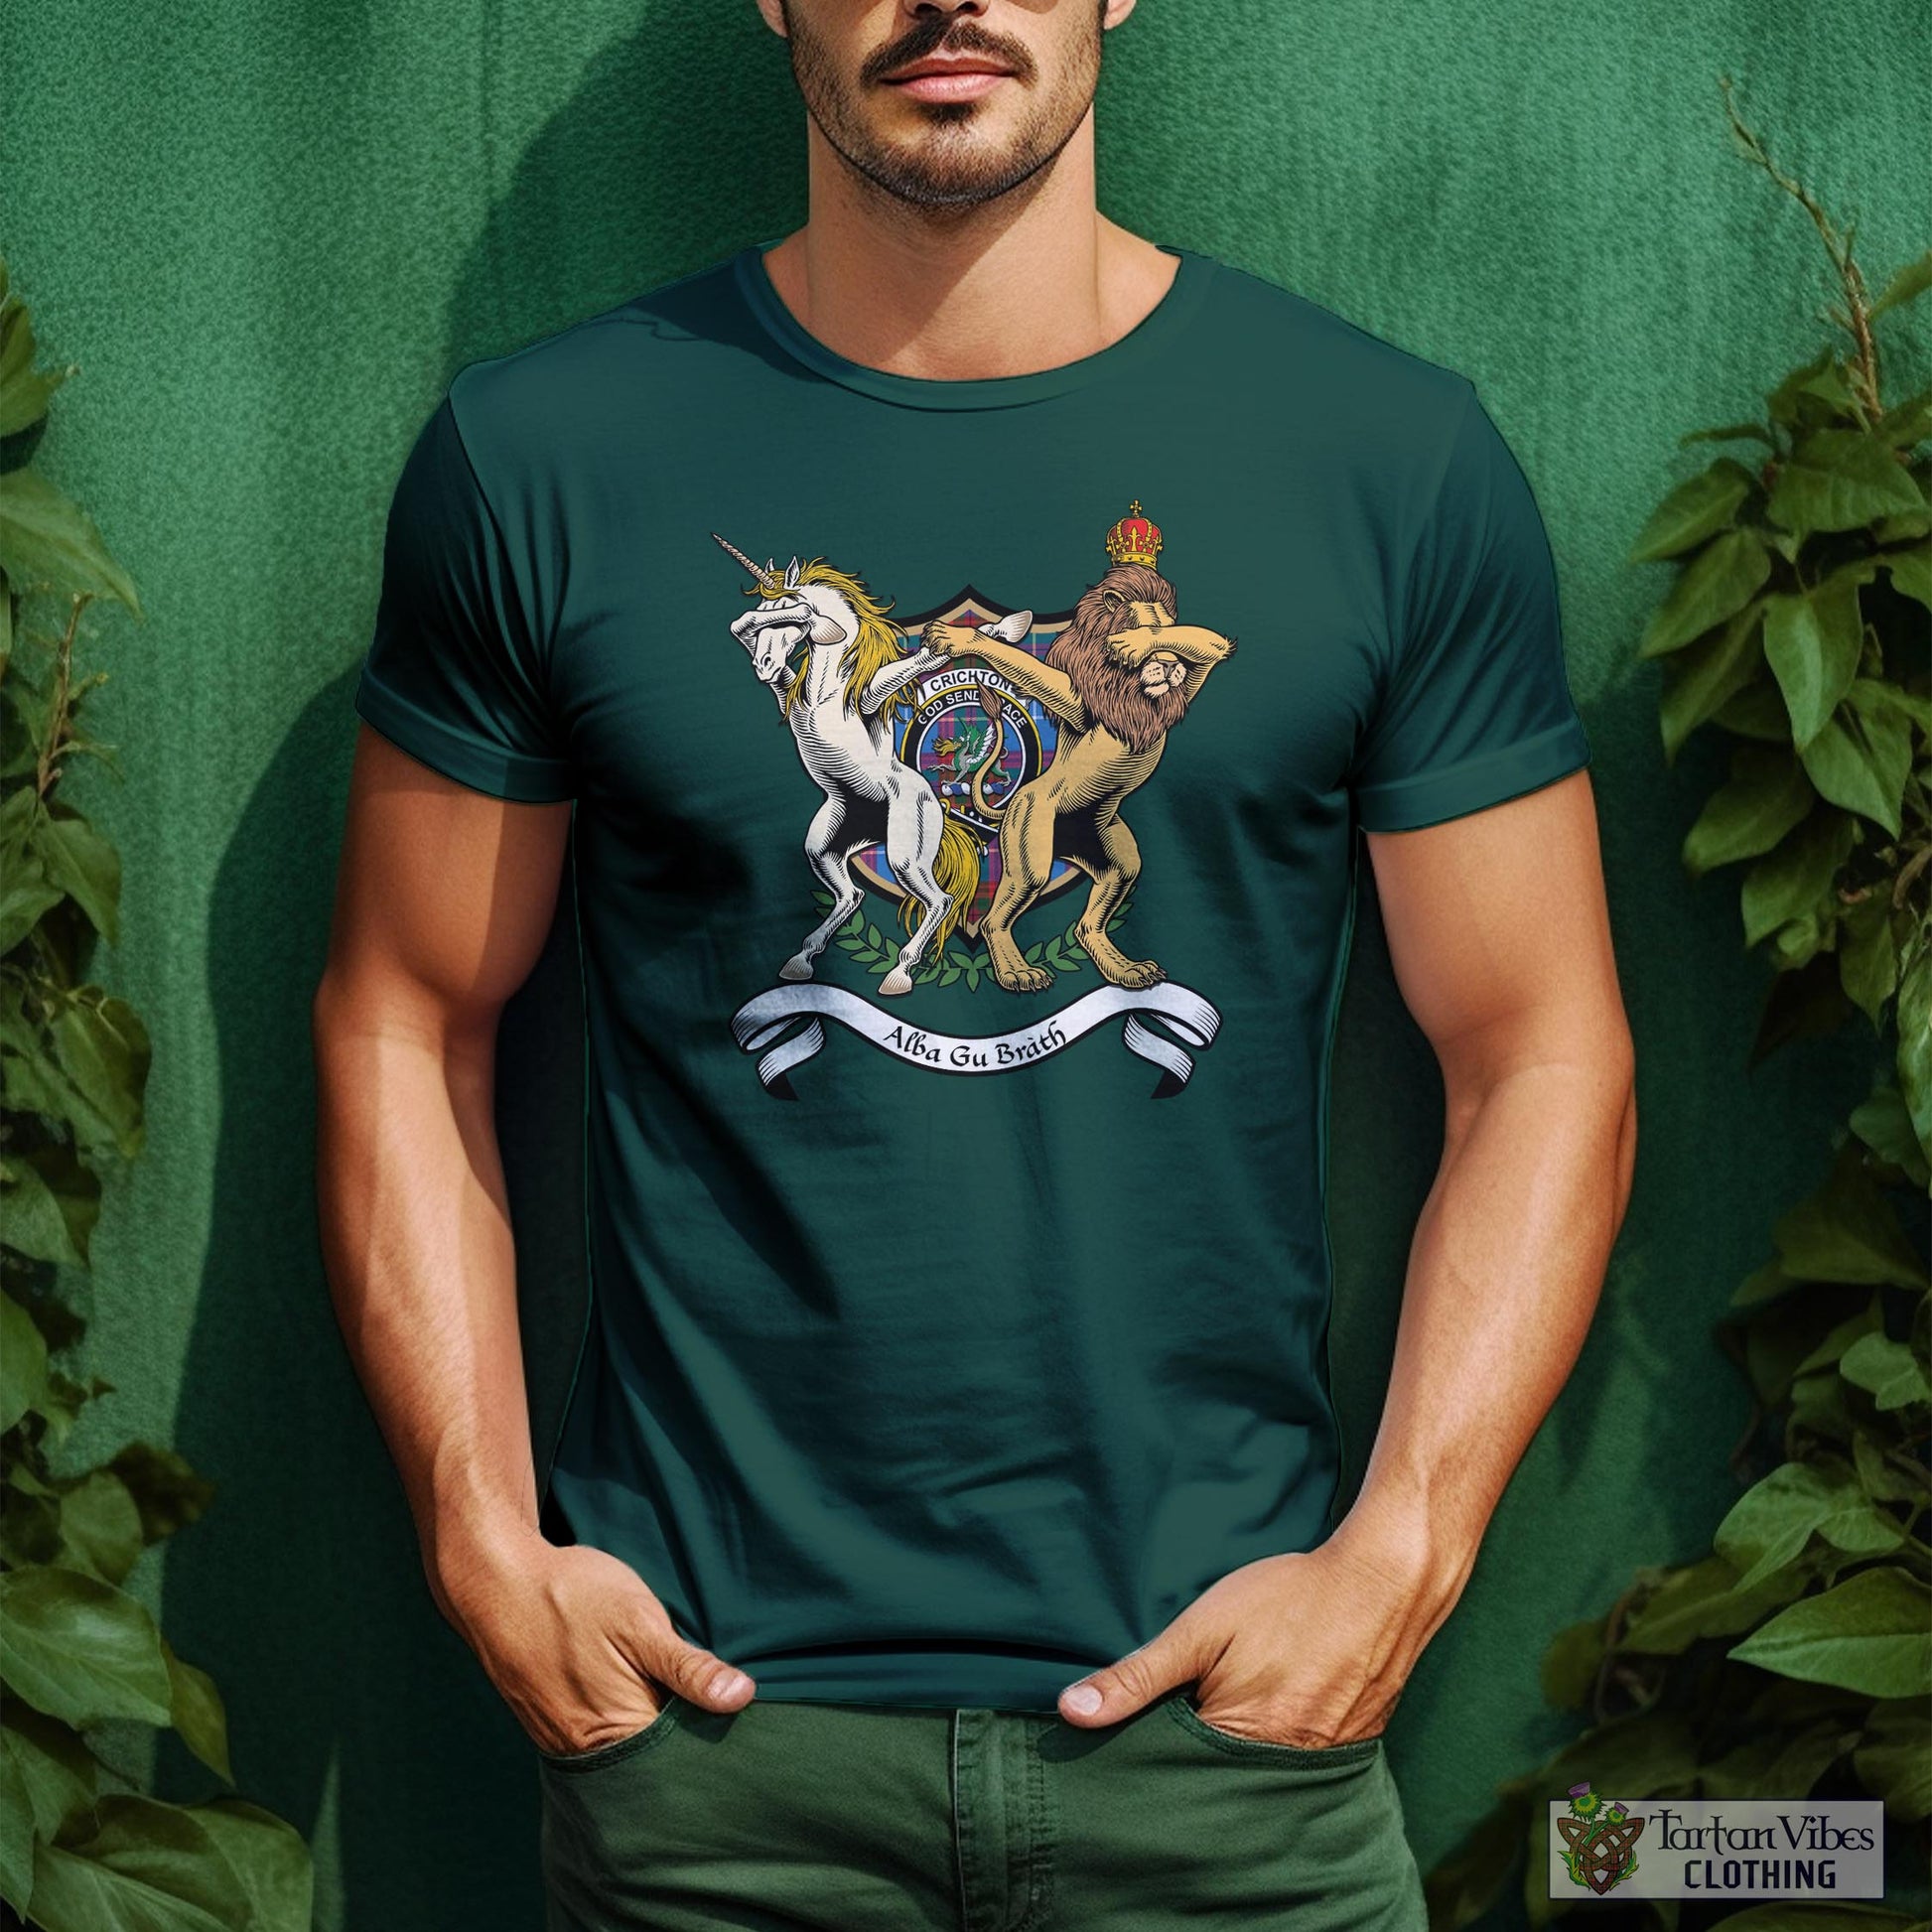 Tartan Vibes Clothing Crichton Family Crest Cotton Men's T-Shirt with Scotland Royal Coat Of Arm Funny Style